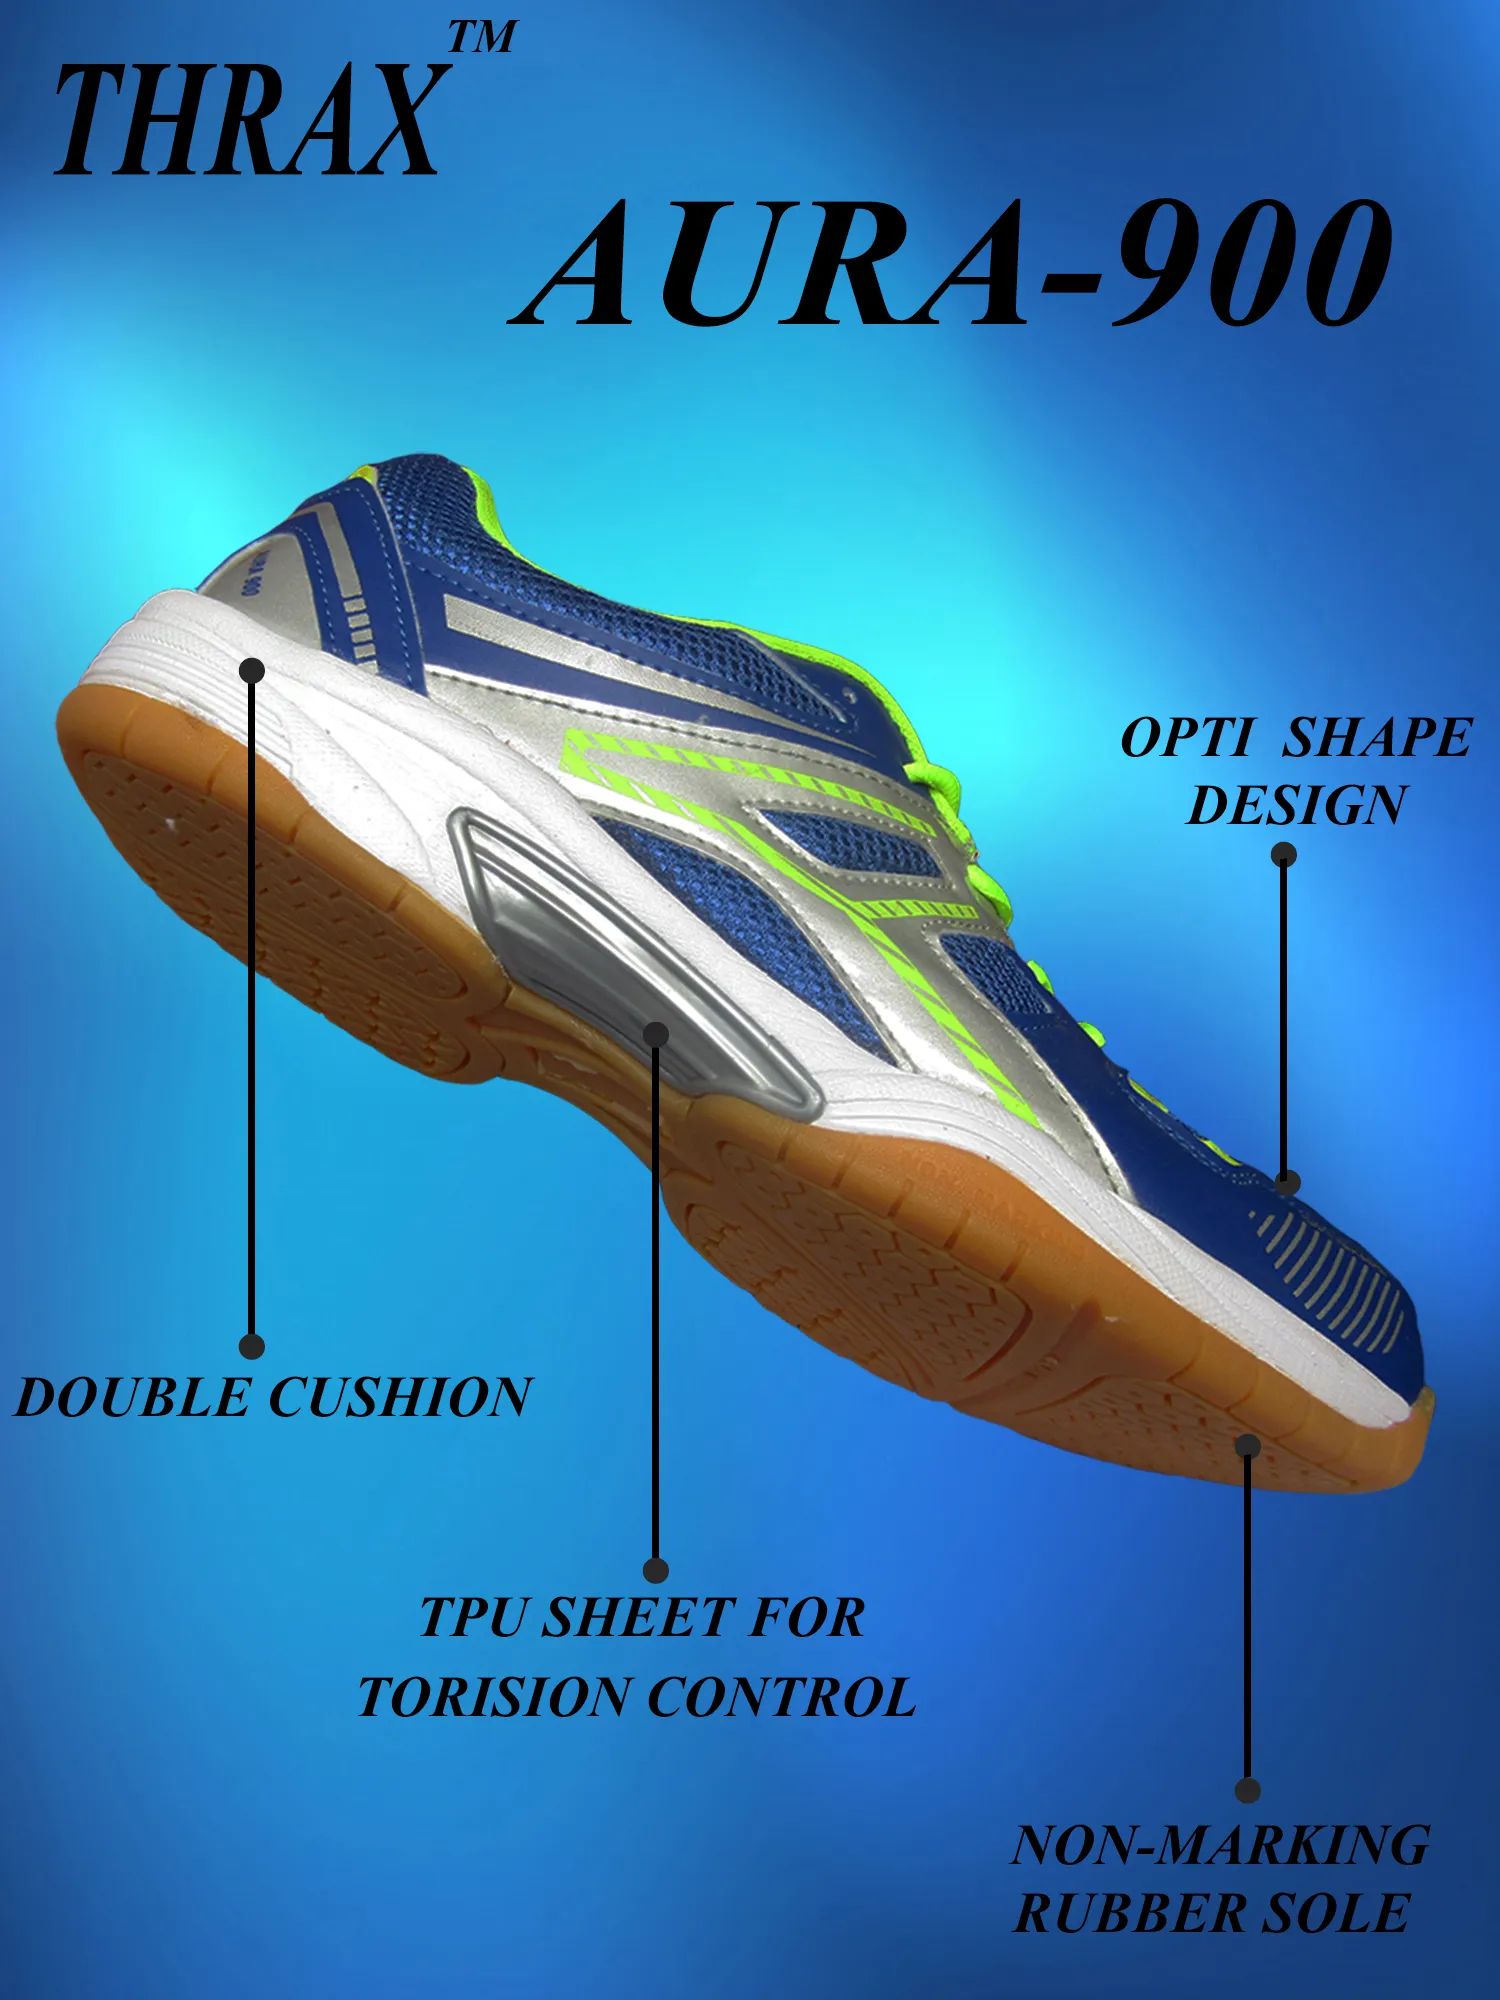 Thrax_Aura_900_Badminton_Shoes_Blue_Lime_Specification